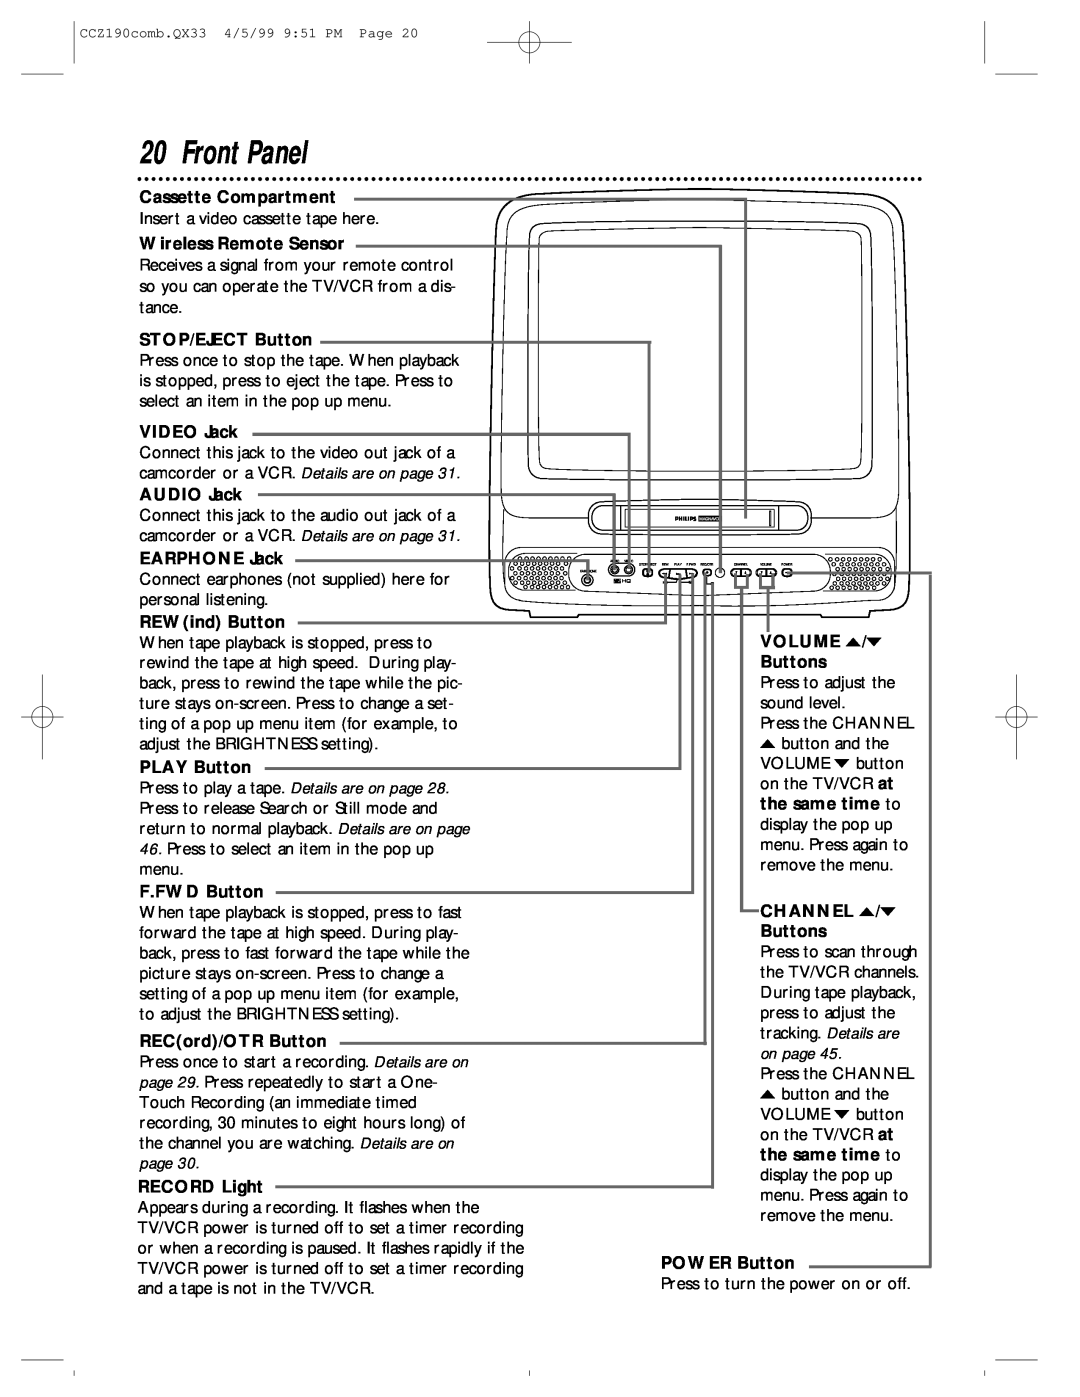 Magnavox CCZ190AT Front Panel, camcorder or a VCR. Details are on page, Press to play a tape. Details are on page 